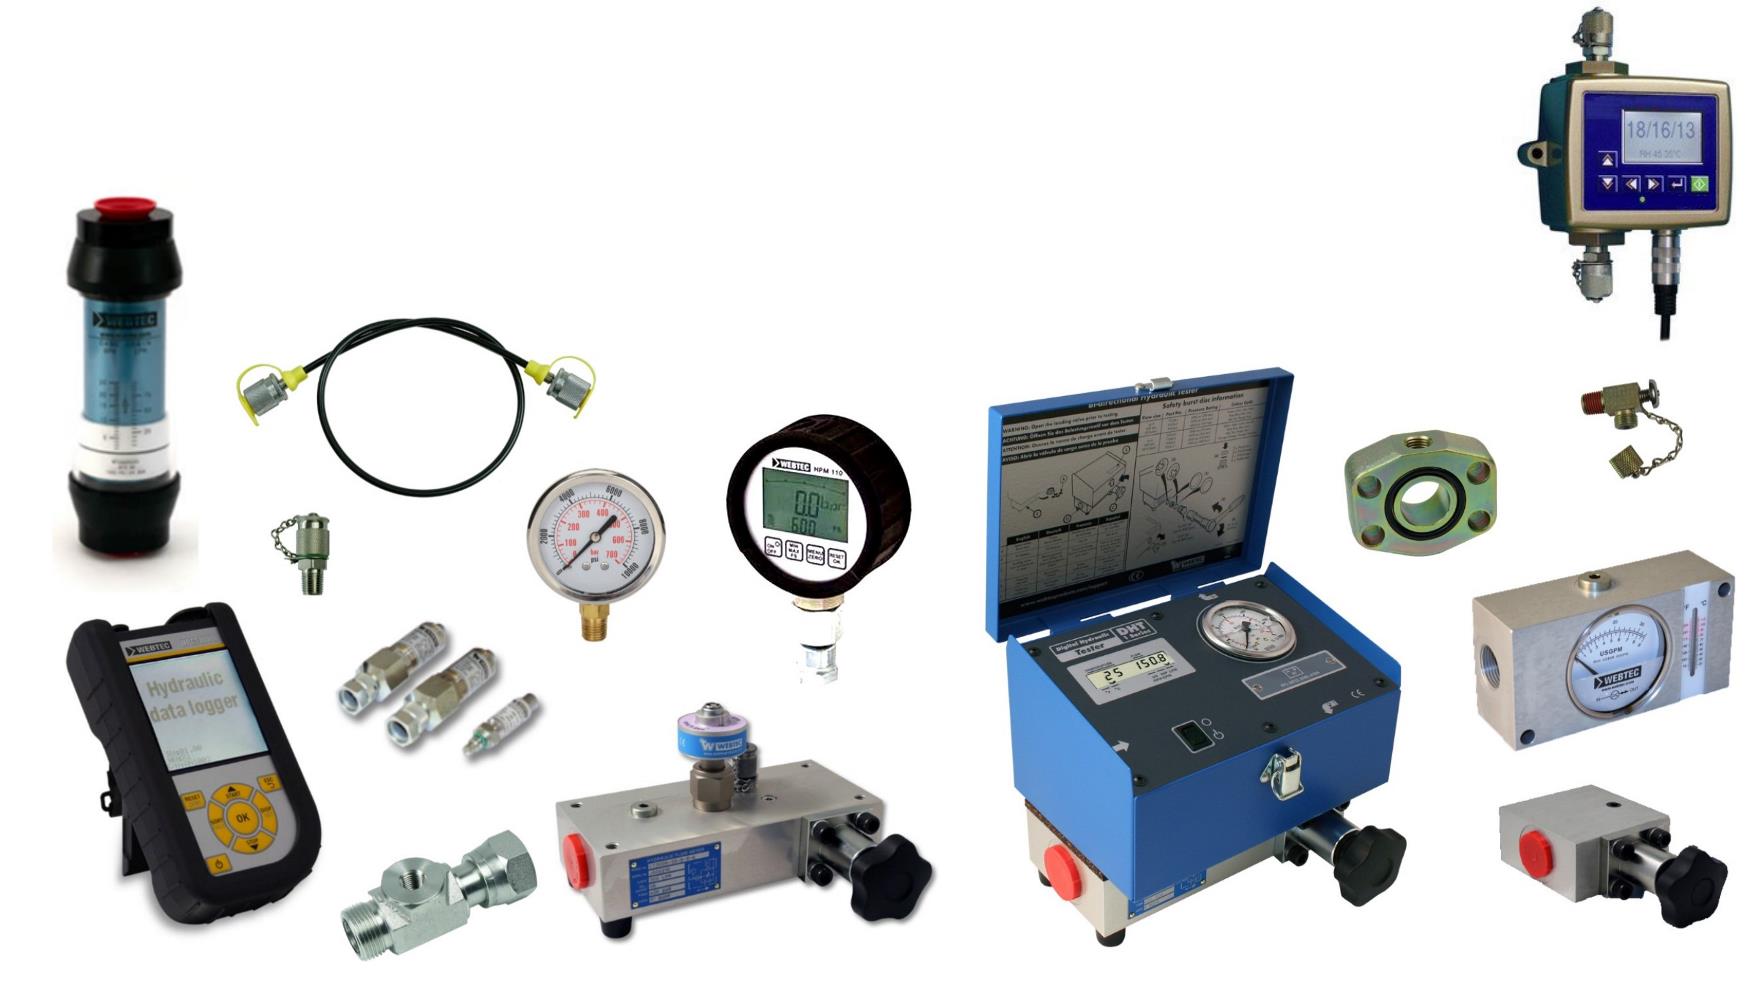 We Distribute a Wide Range of Hydraulic Diagnostic Tools and Instruments
Designed for Your Mobile or Industrial Equipments.
PRESSURE, TEMPERATURE, FLOW, ROTATION SPEED, PARTICLE COUNTERS
